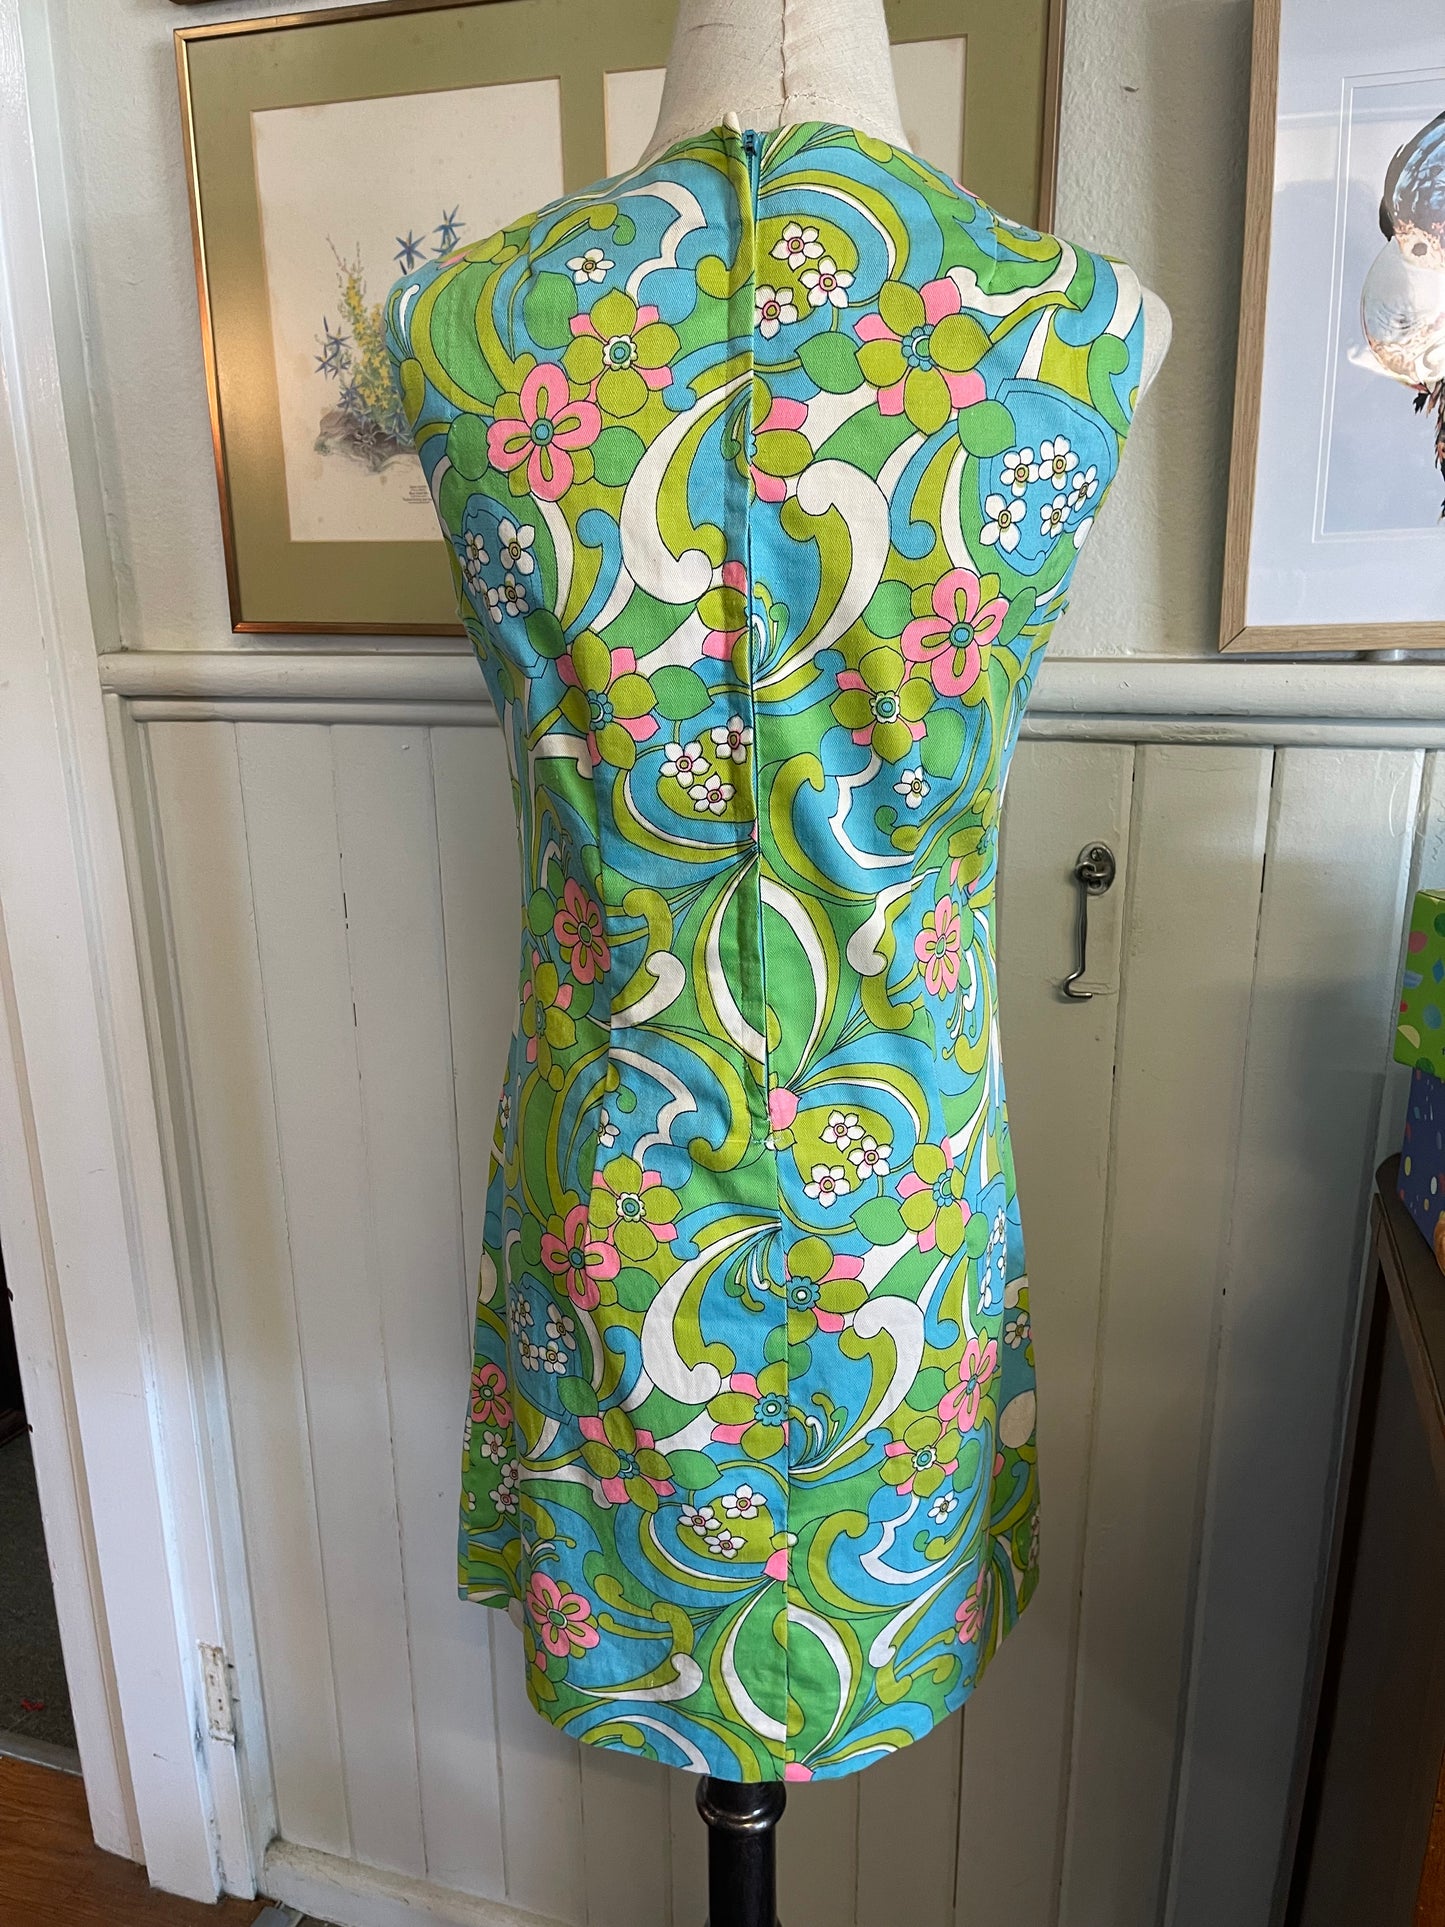 Vintage 60s handmade aqua green pink abstract floral cotton Dress Size 8-10